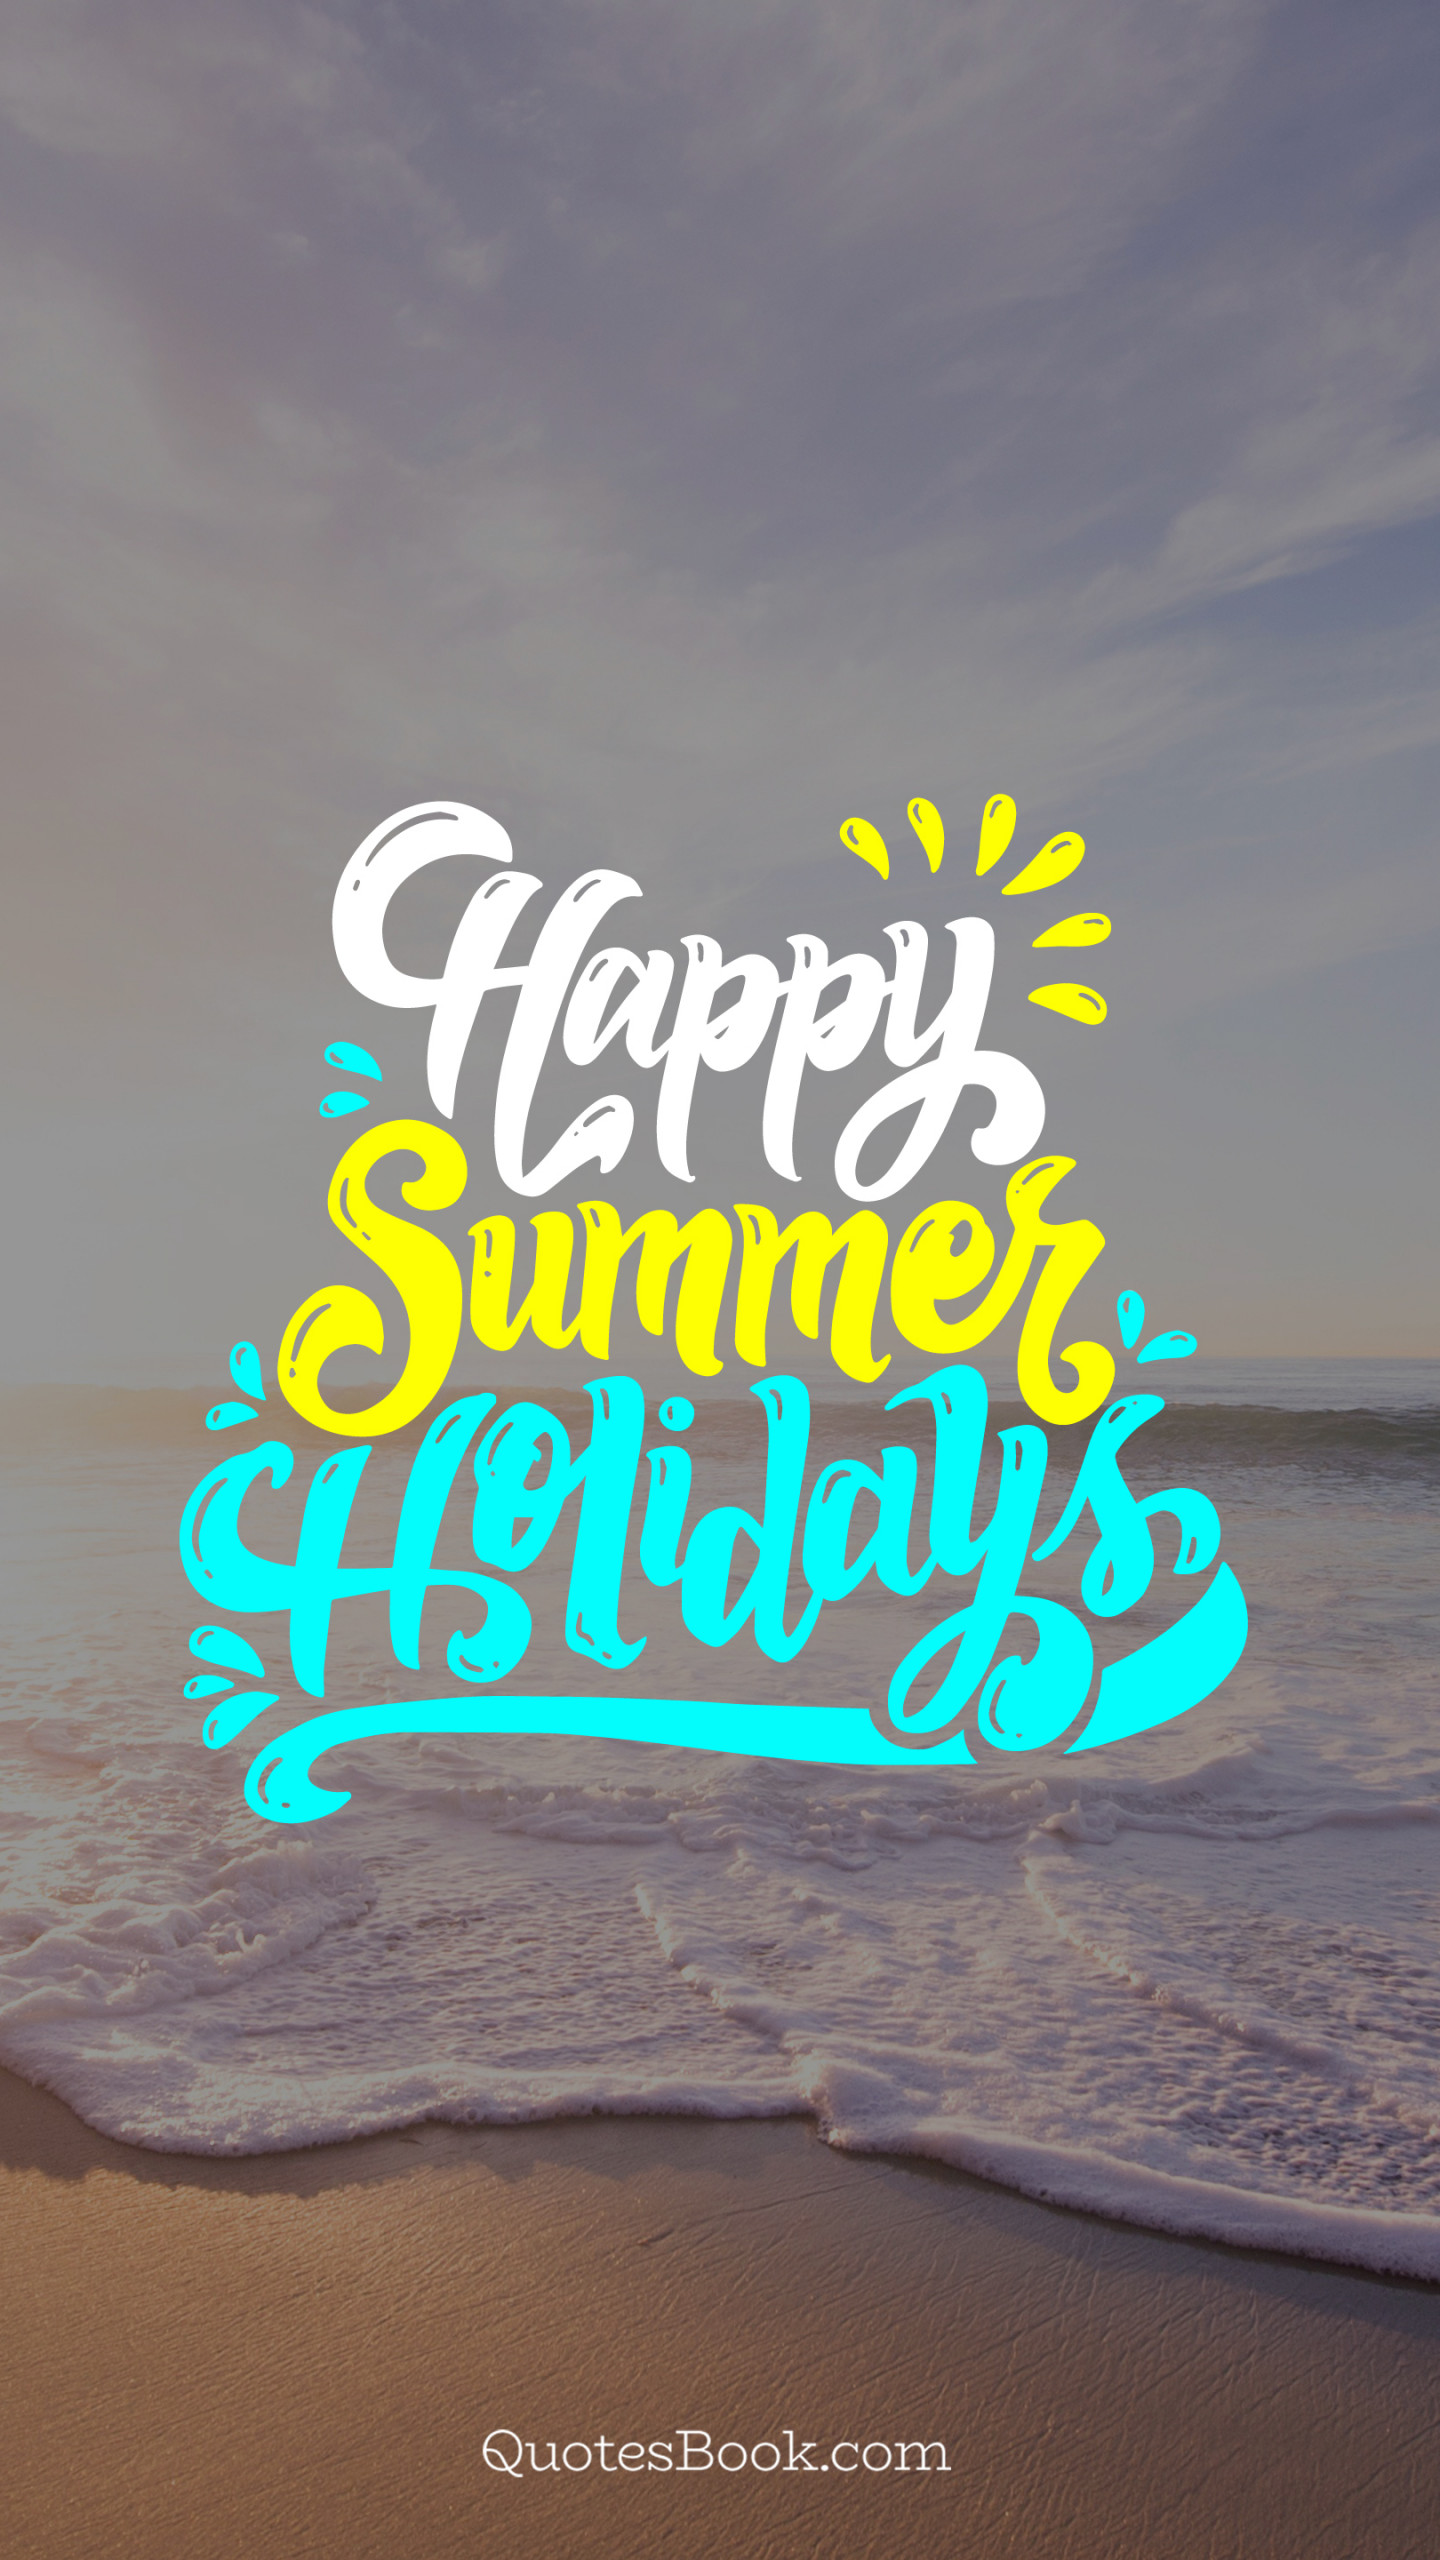 Happy summer holidays - QuotesBook